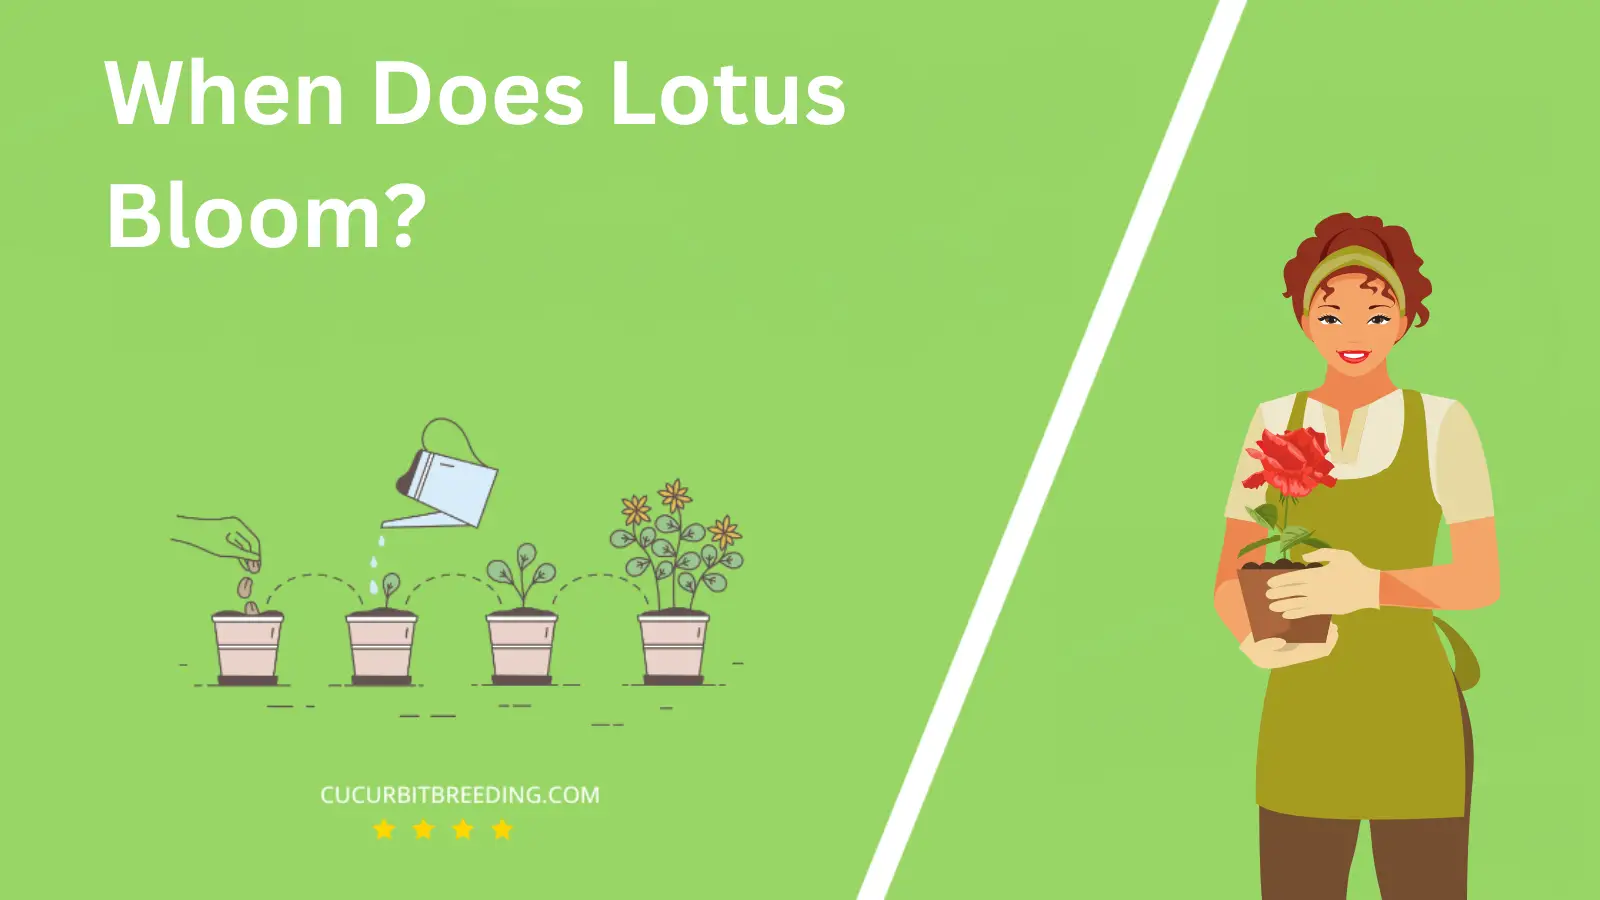 When Does Lotus Bloom?